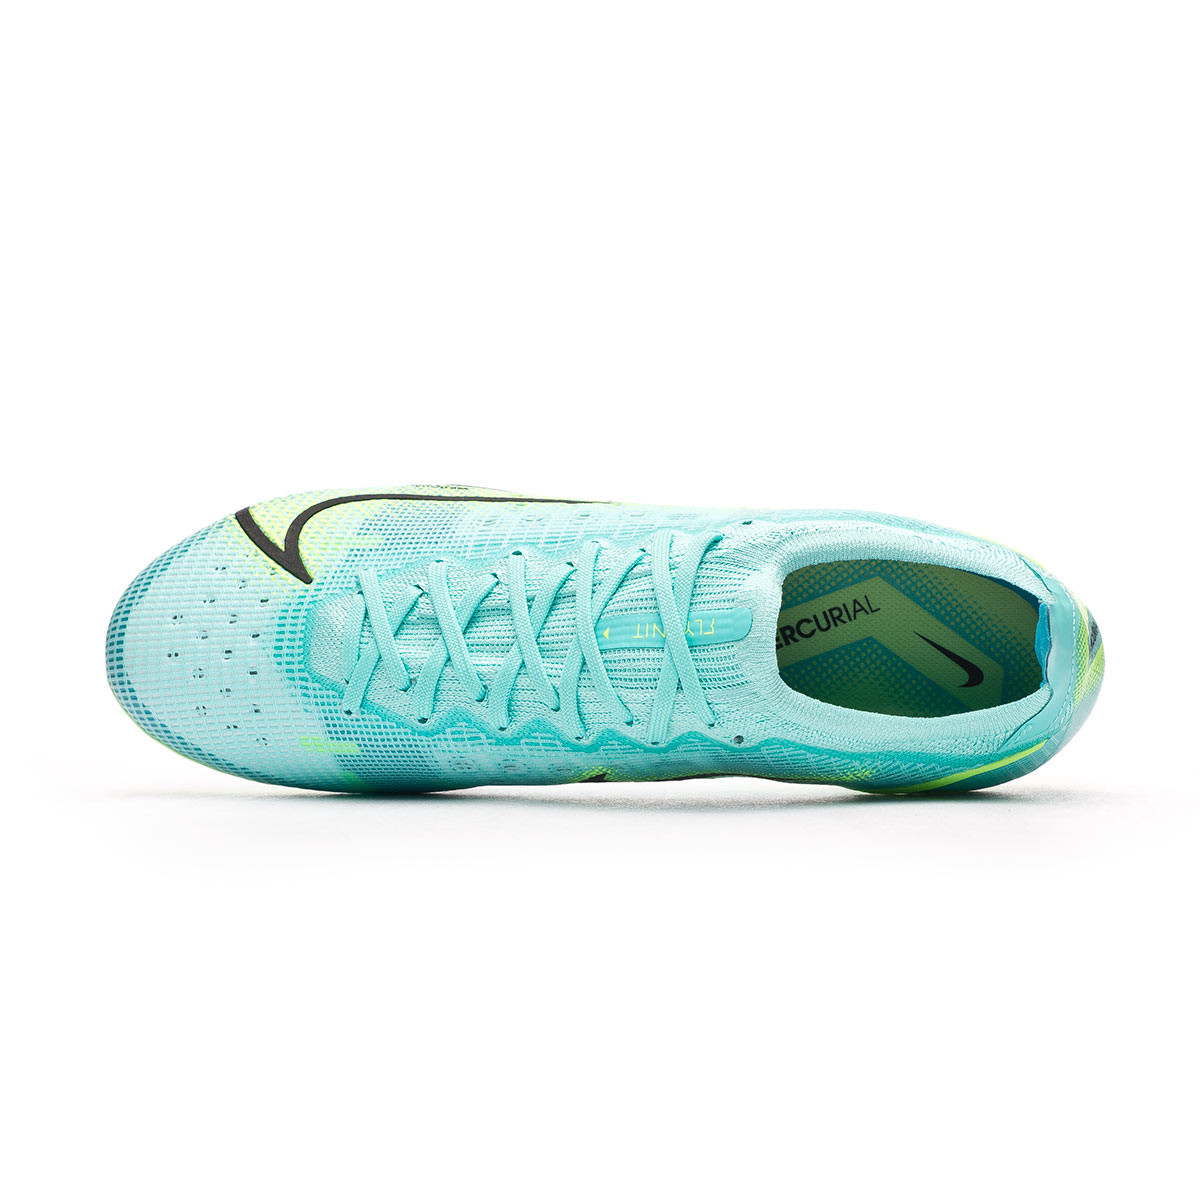 turquoise nike football boots